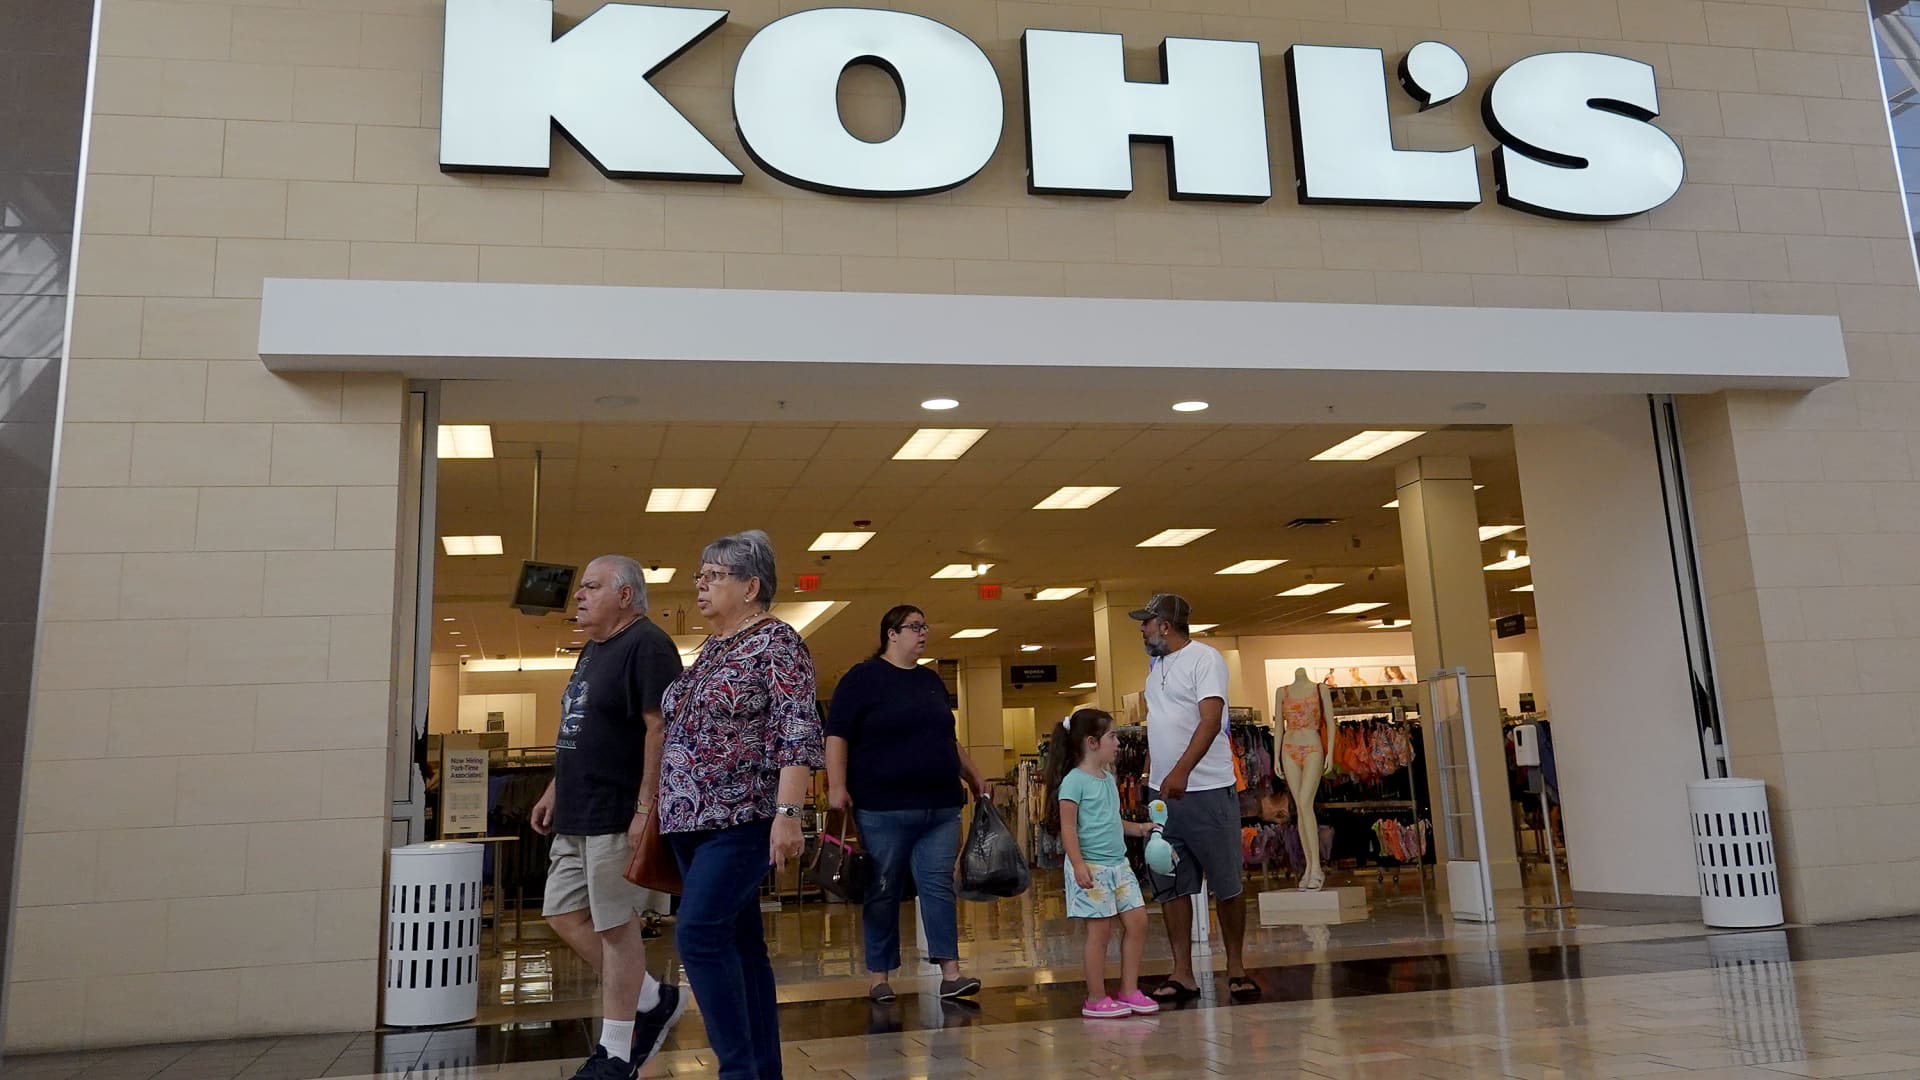 Franchise Group considers lowering Kohl’s bid closer to $50 a share from about $60 source says – CNBC